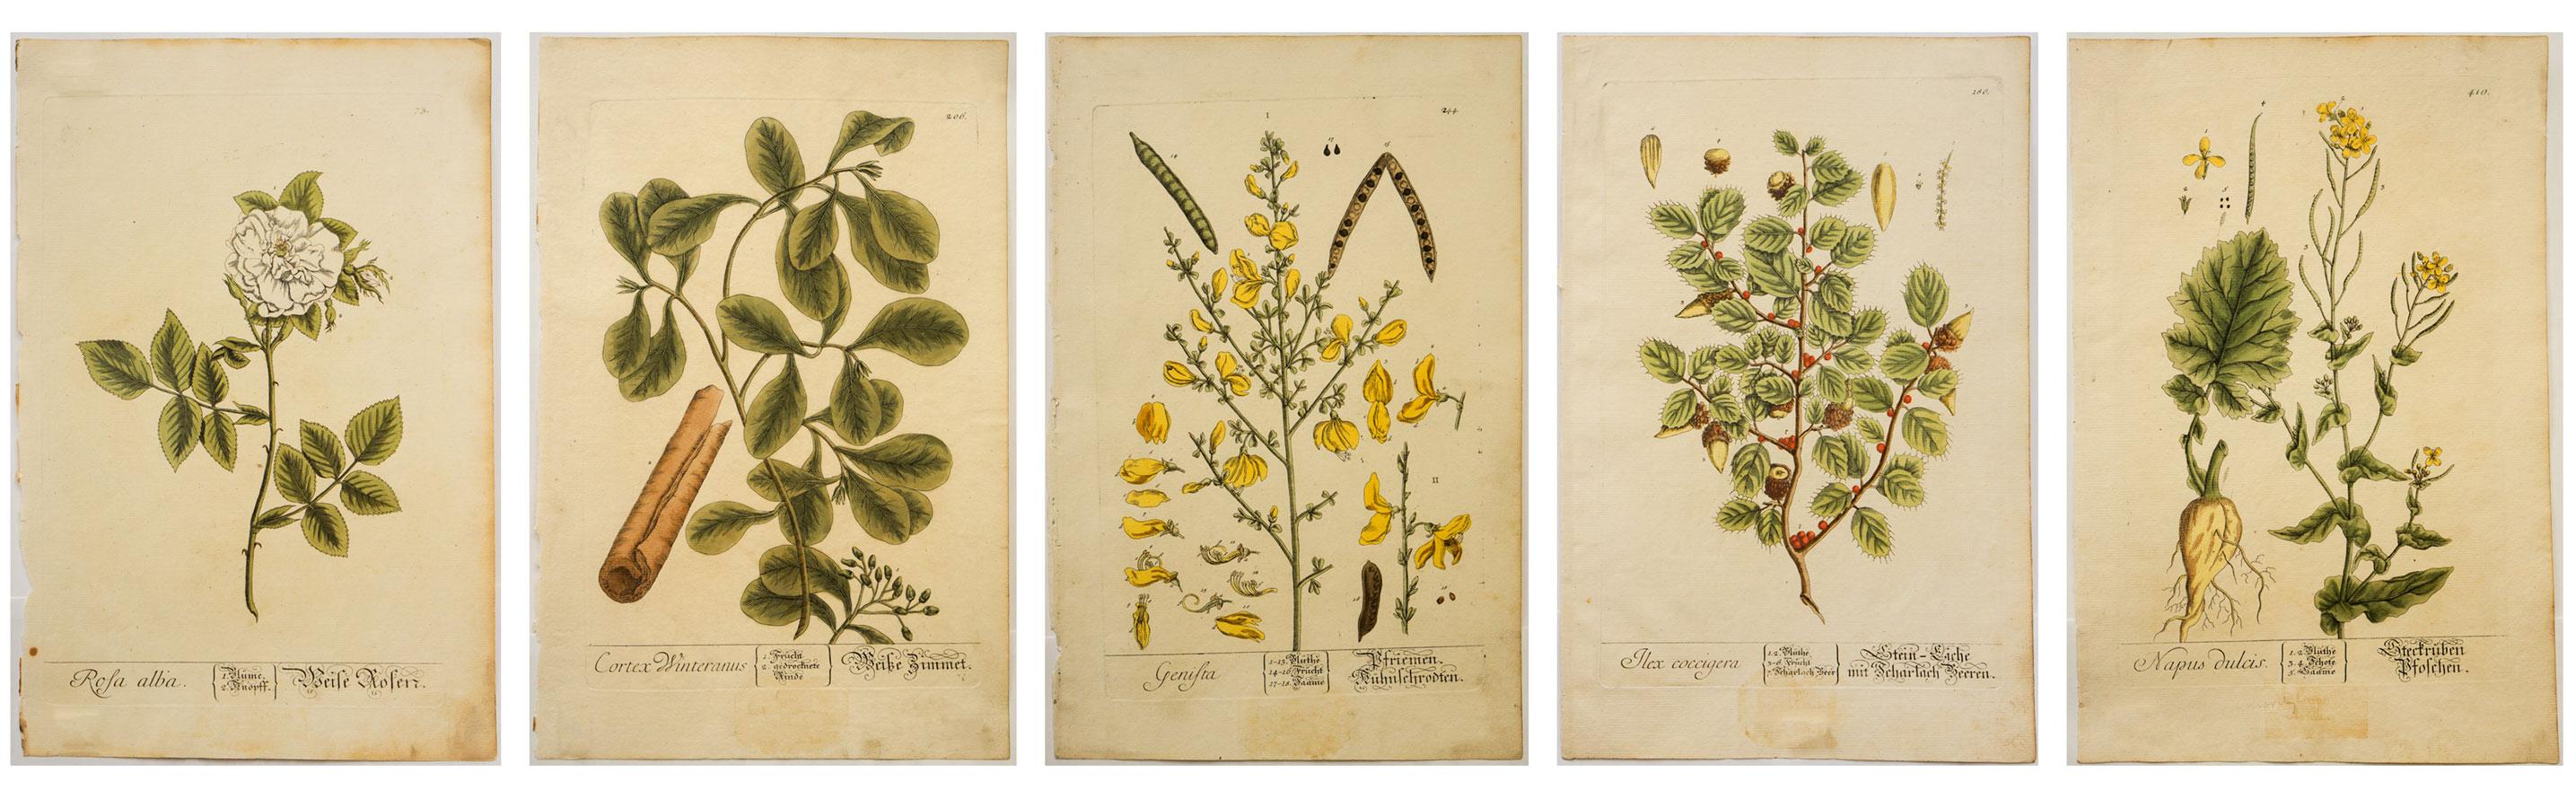 Hand-colored copper engraving on laid paper by Nikolaus Freidrich Eisenberger (1707-1771), after drawings by Scottish-born artist Mrs. Elizabeth Blackwell (1700-1758). Originally published by Samuel Harding in London in 1737-39 as A Curious Herbal: